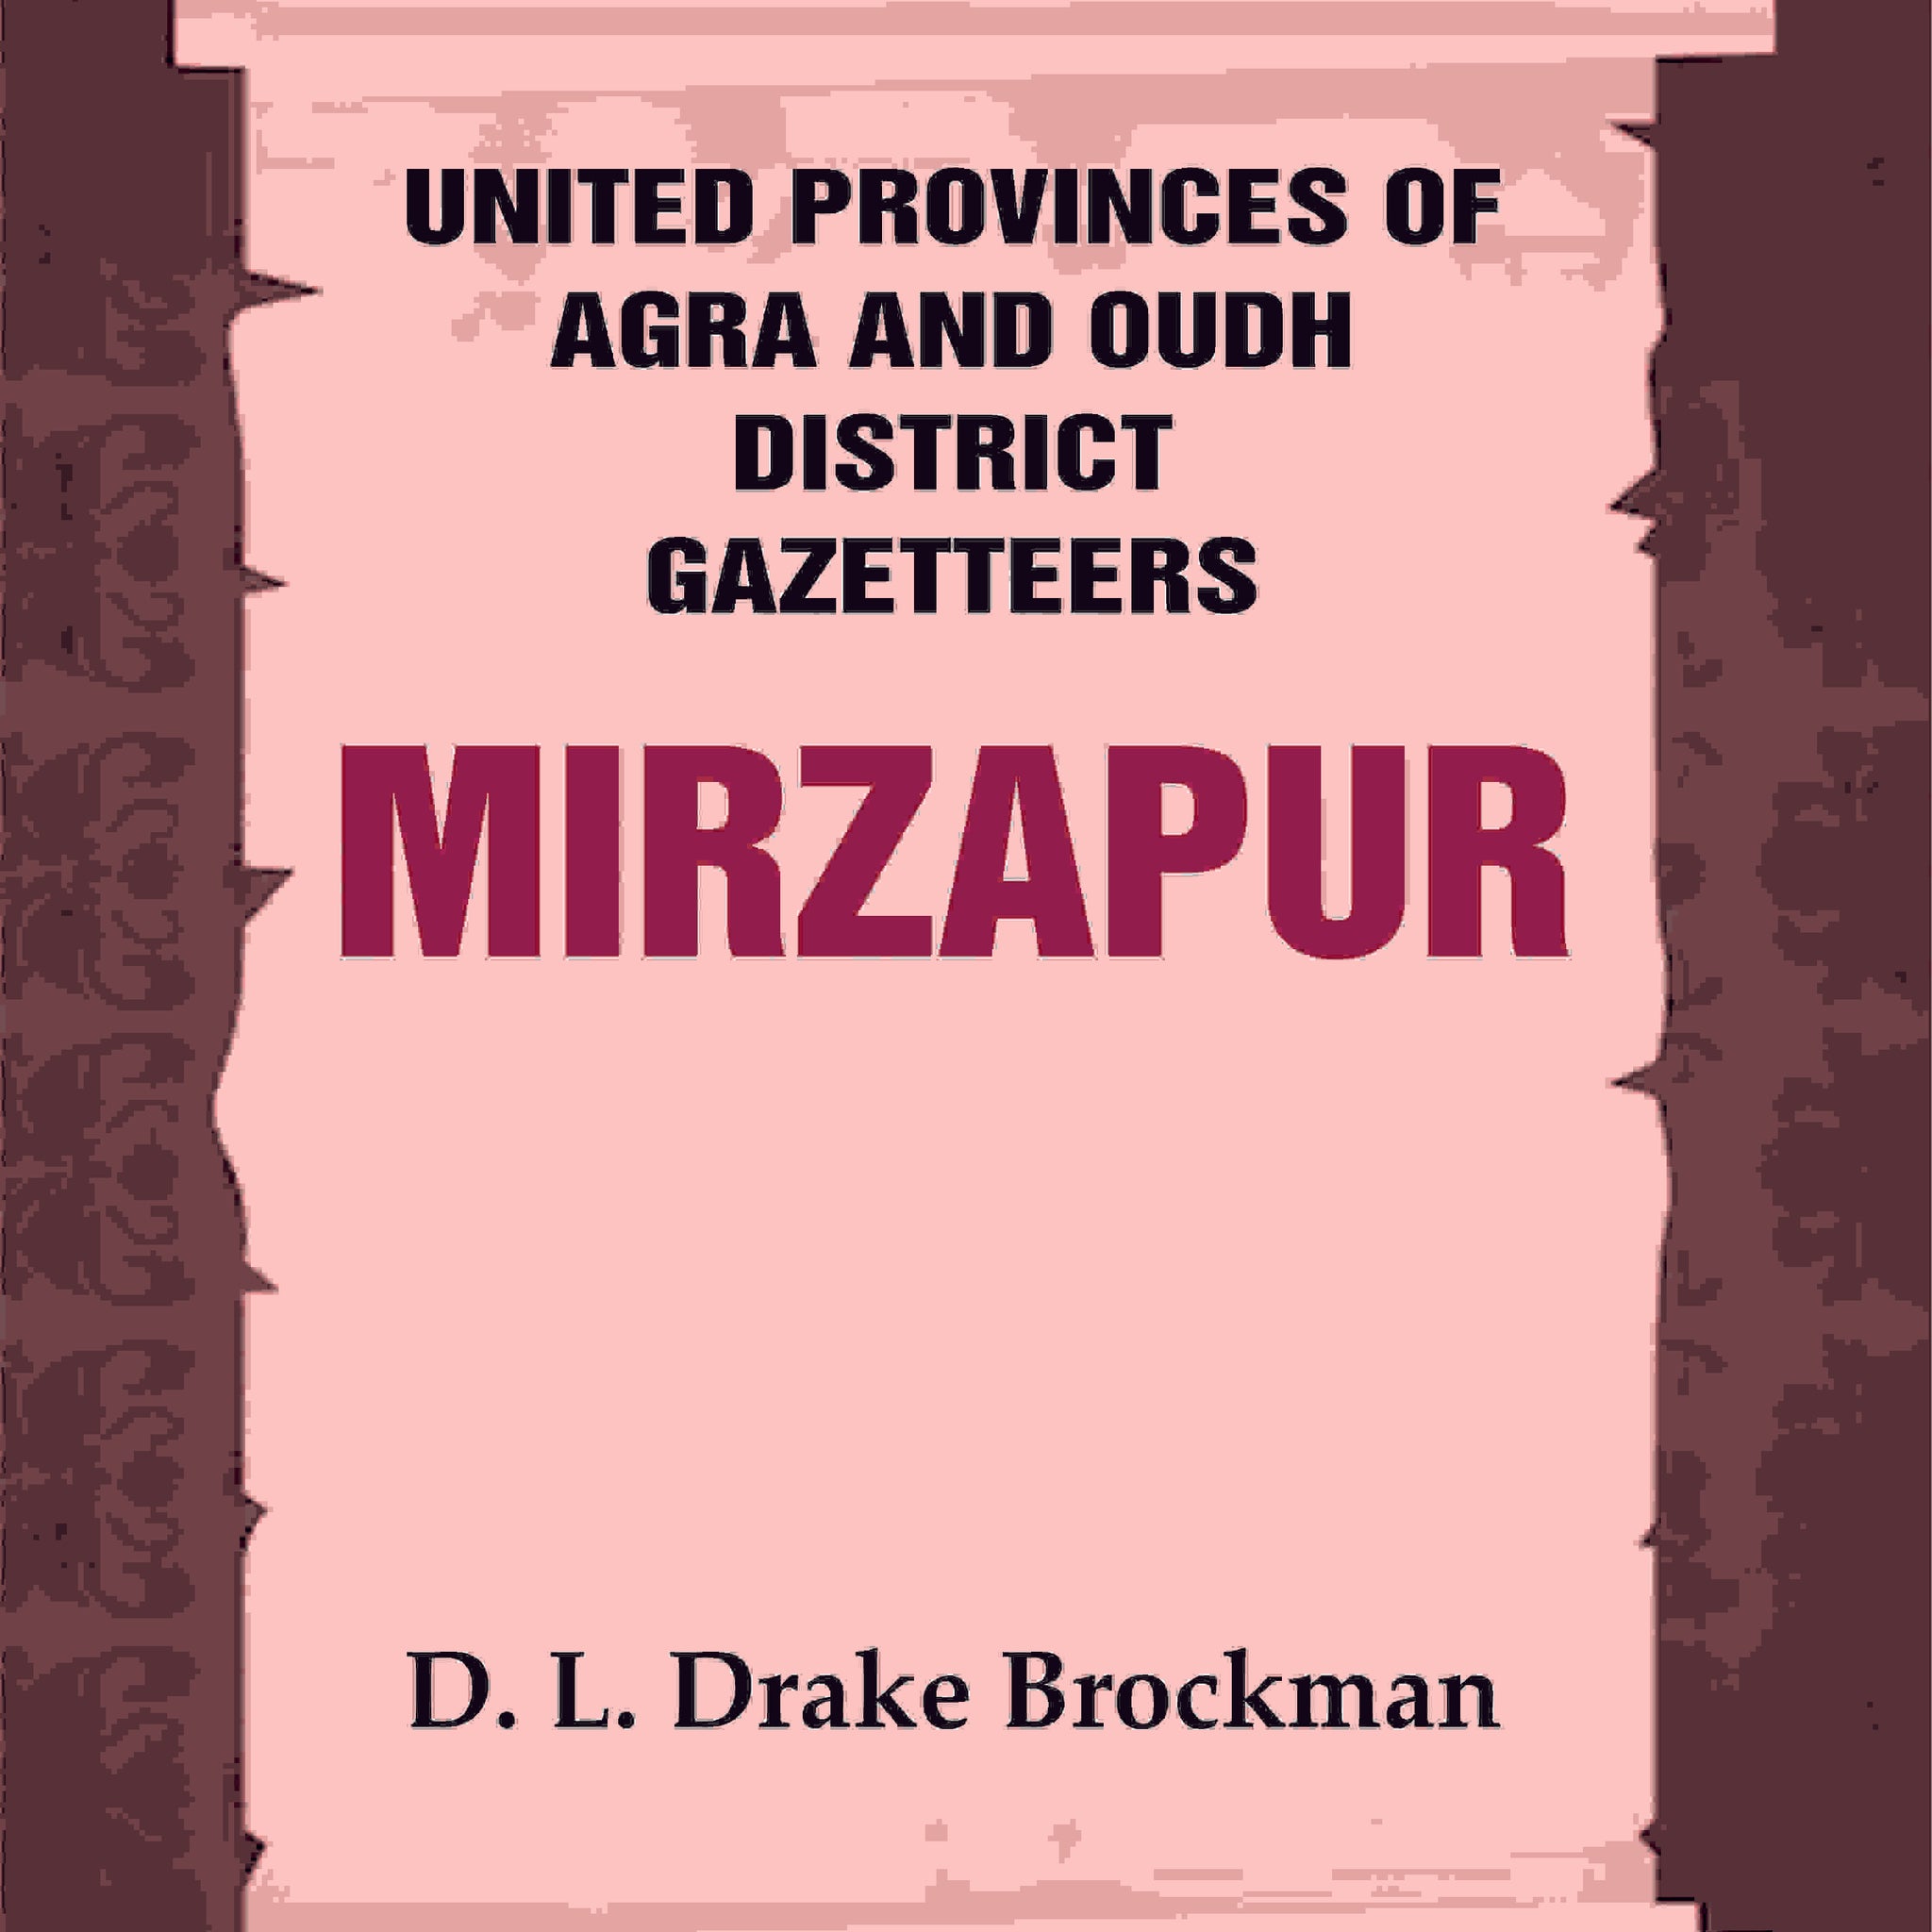 United Provinces of Agra and Oudh District Gazetteers: Mirzapur